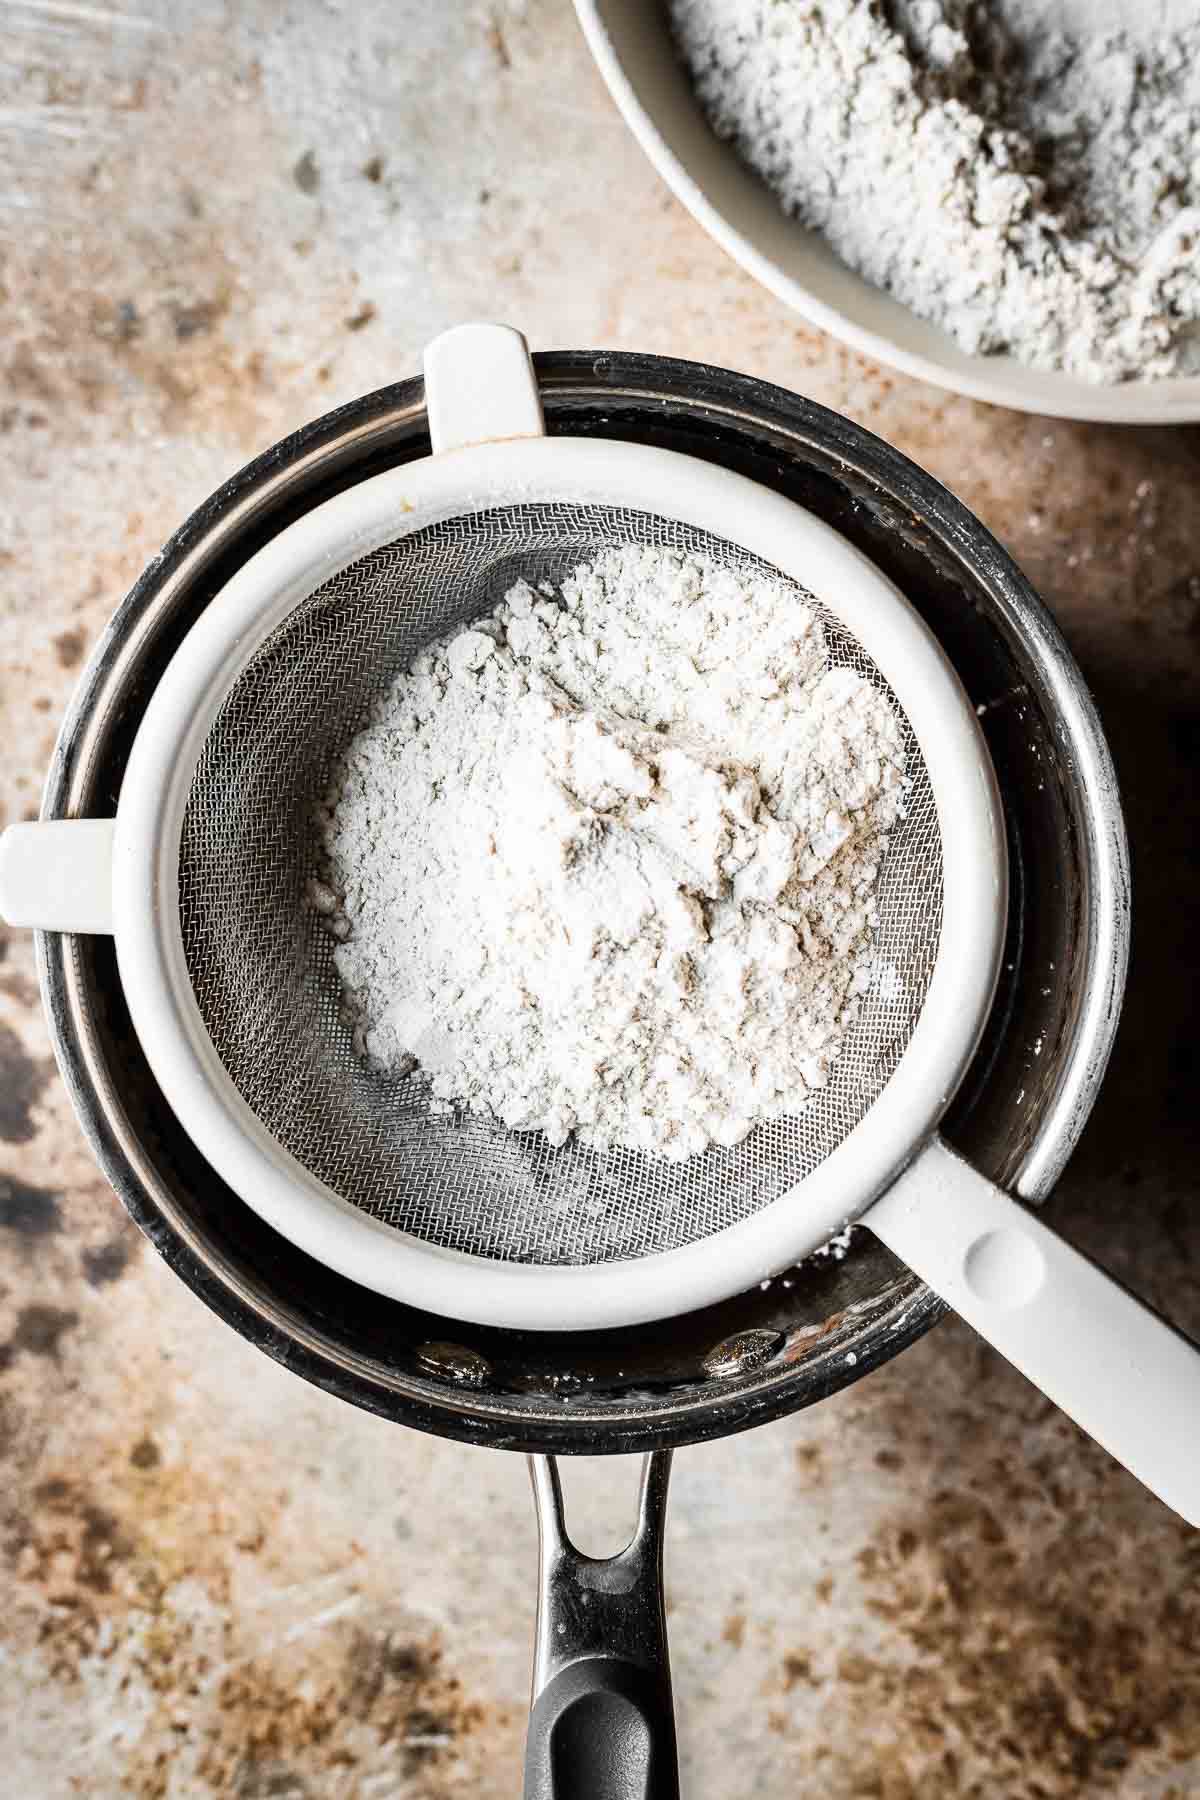 A sieve of flour over a saucepan of cookie batter.